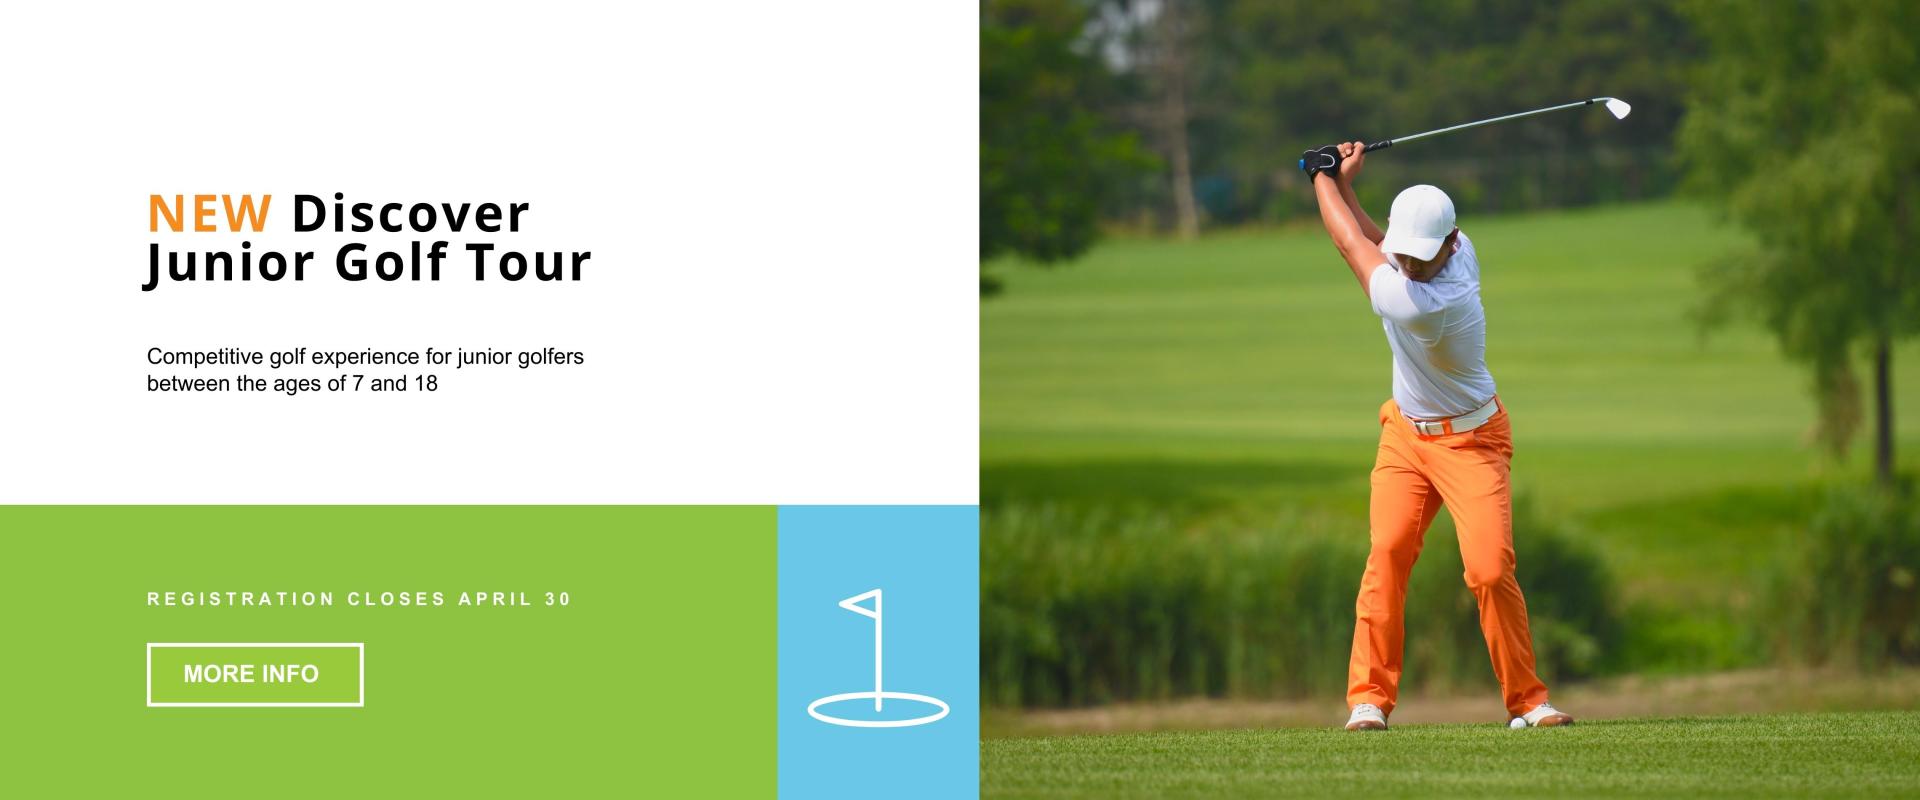 NEW Discover Junior Golf Tour - competitive golf experience for junior golfers between the ages of 7 and 18 - Registration Closes April 30 - More Info - with an image of a male golfer in the back swing with orange pants